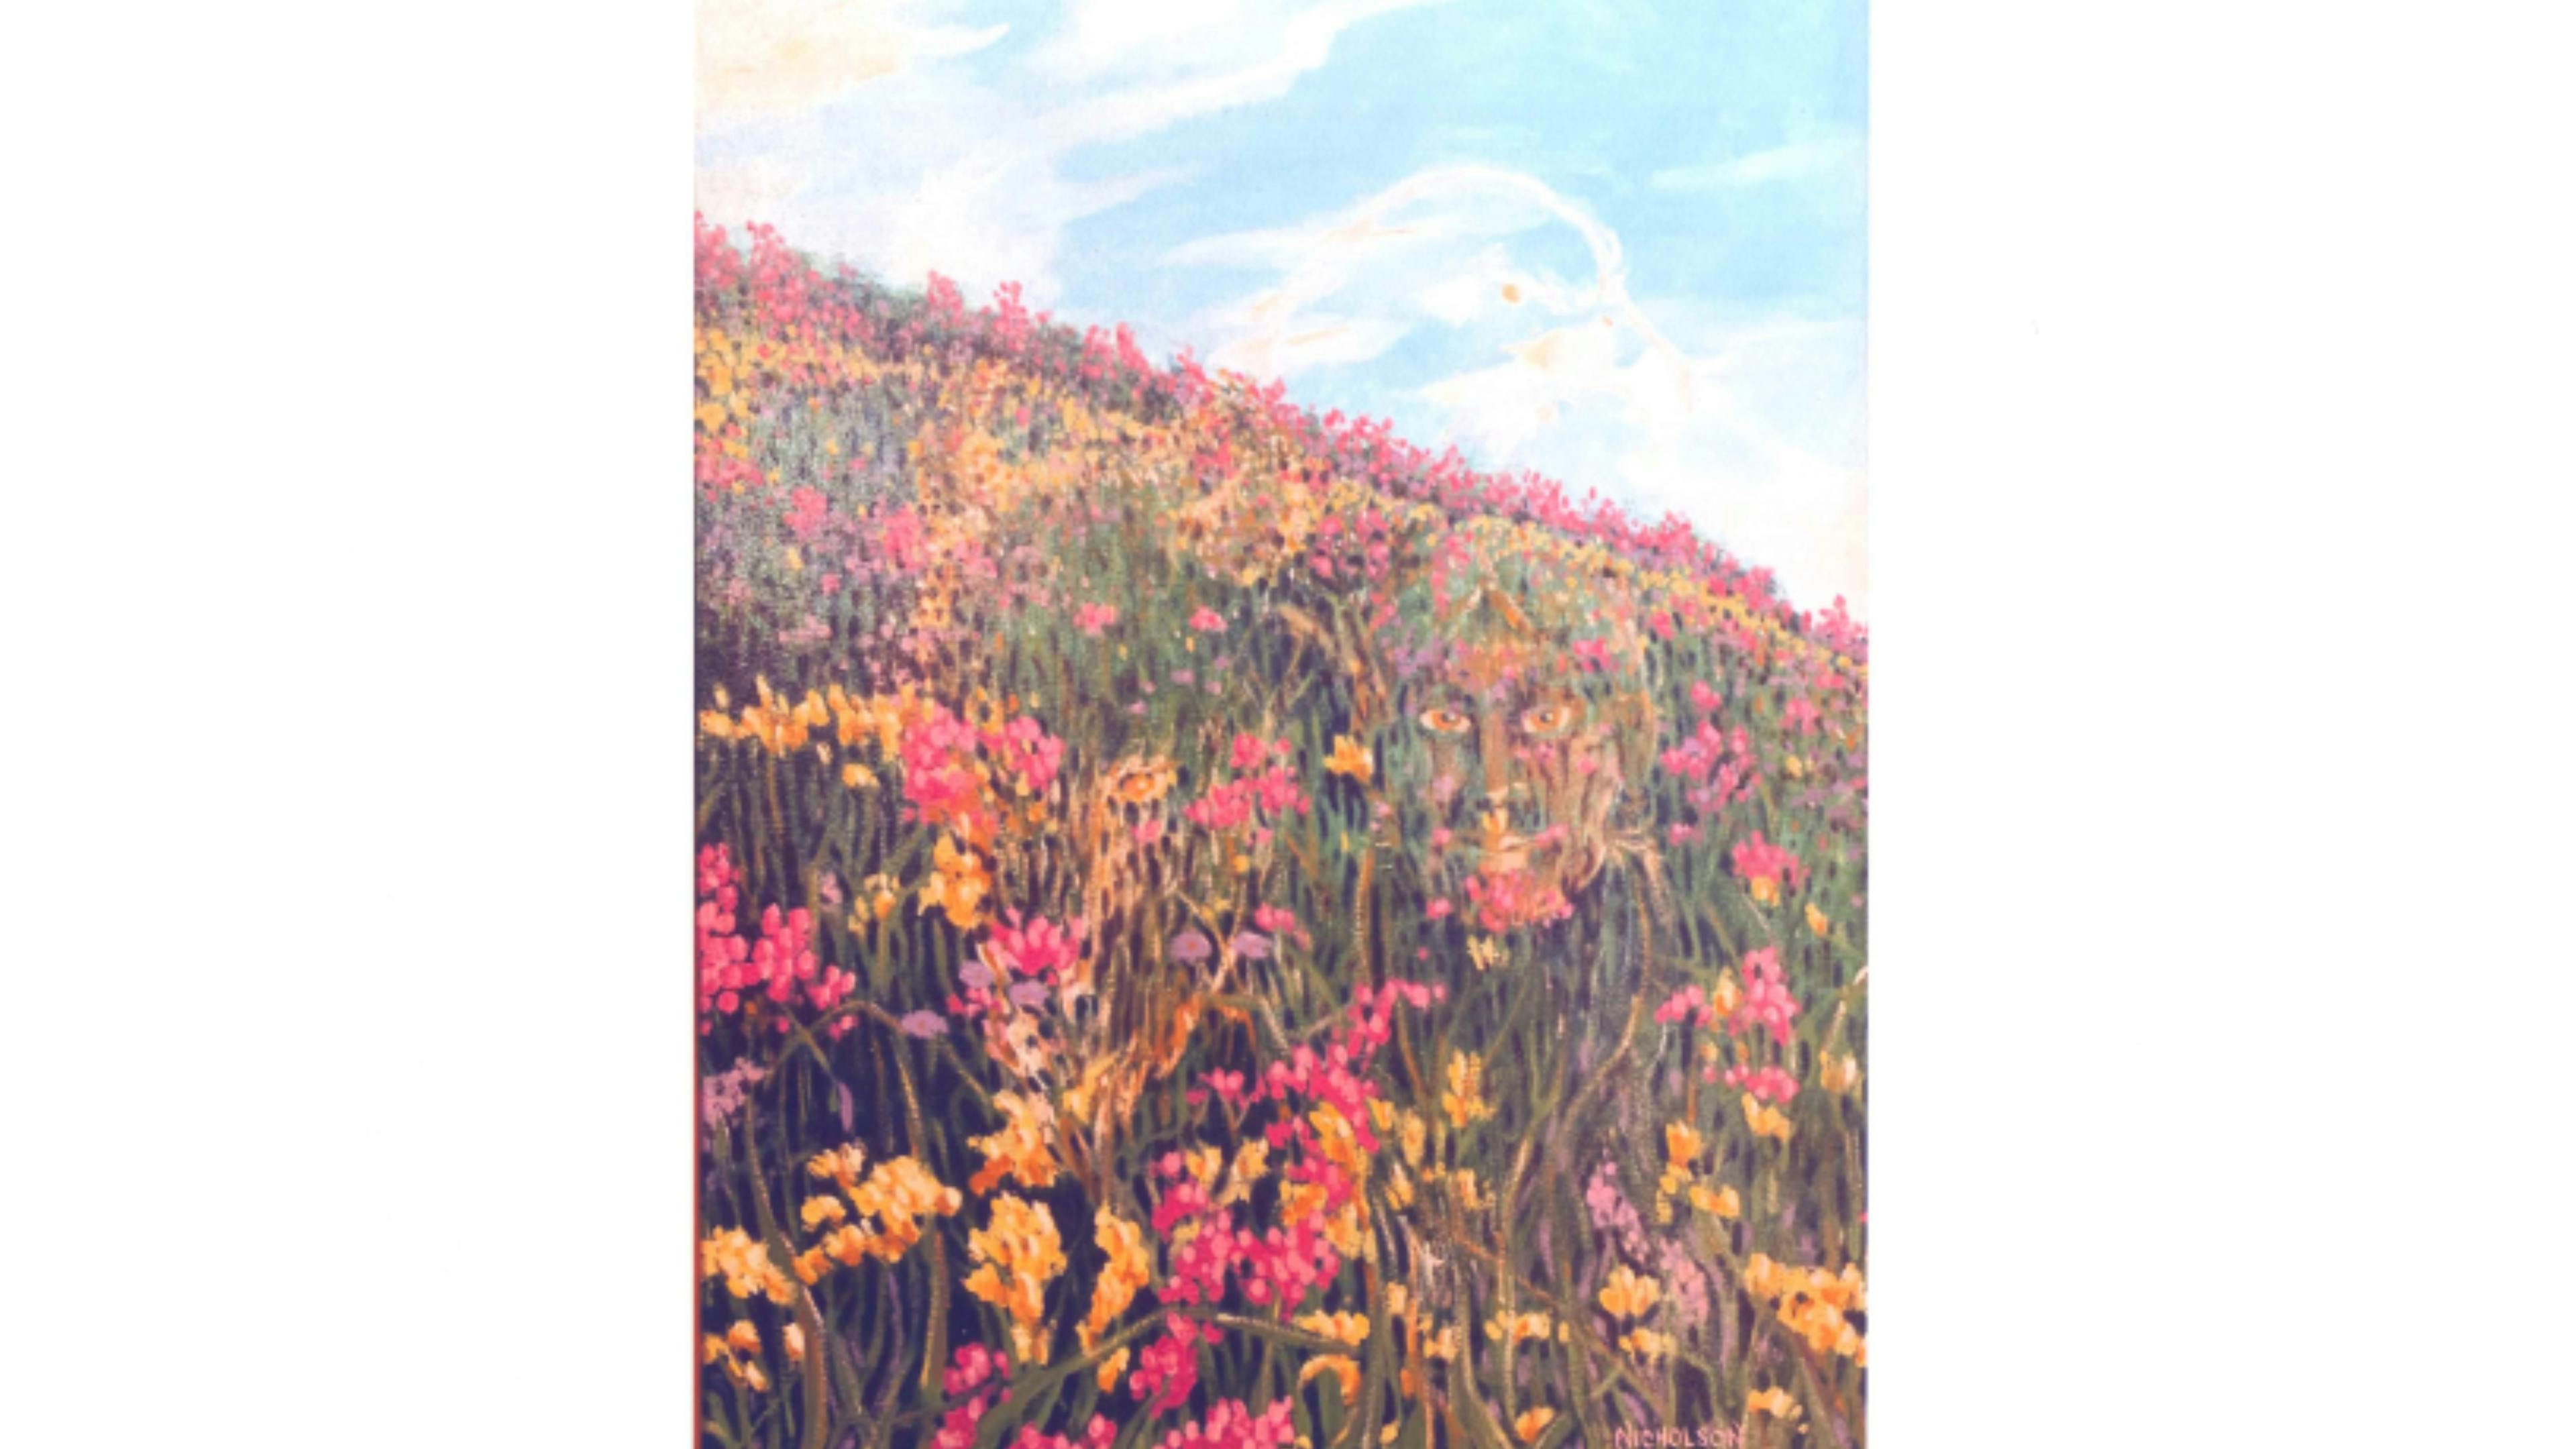 Meadow landscape with pink and orange flowers, a bright blue sky, and three hidden objects.